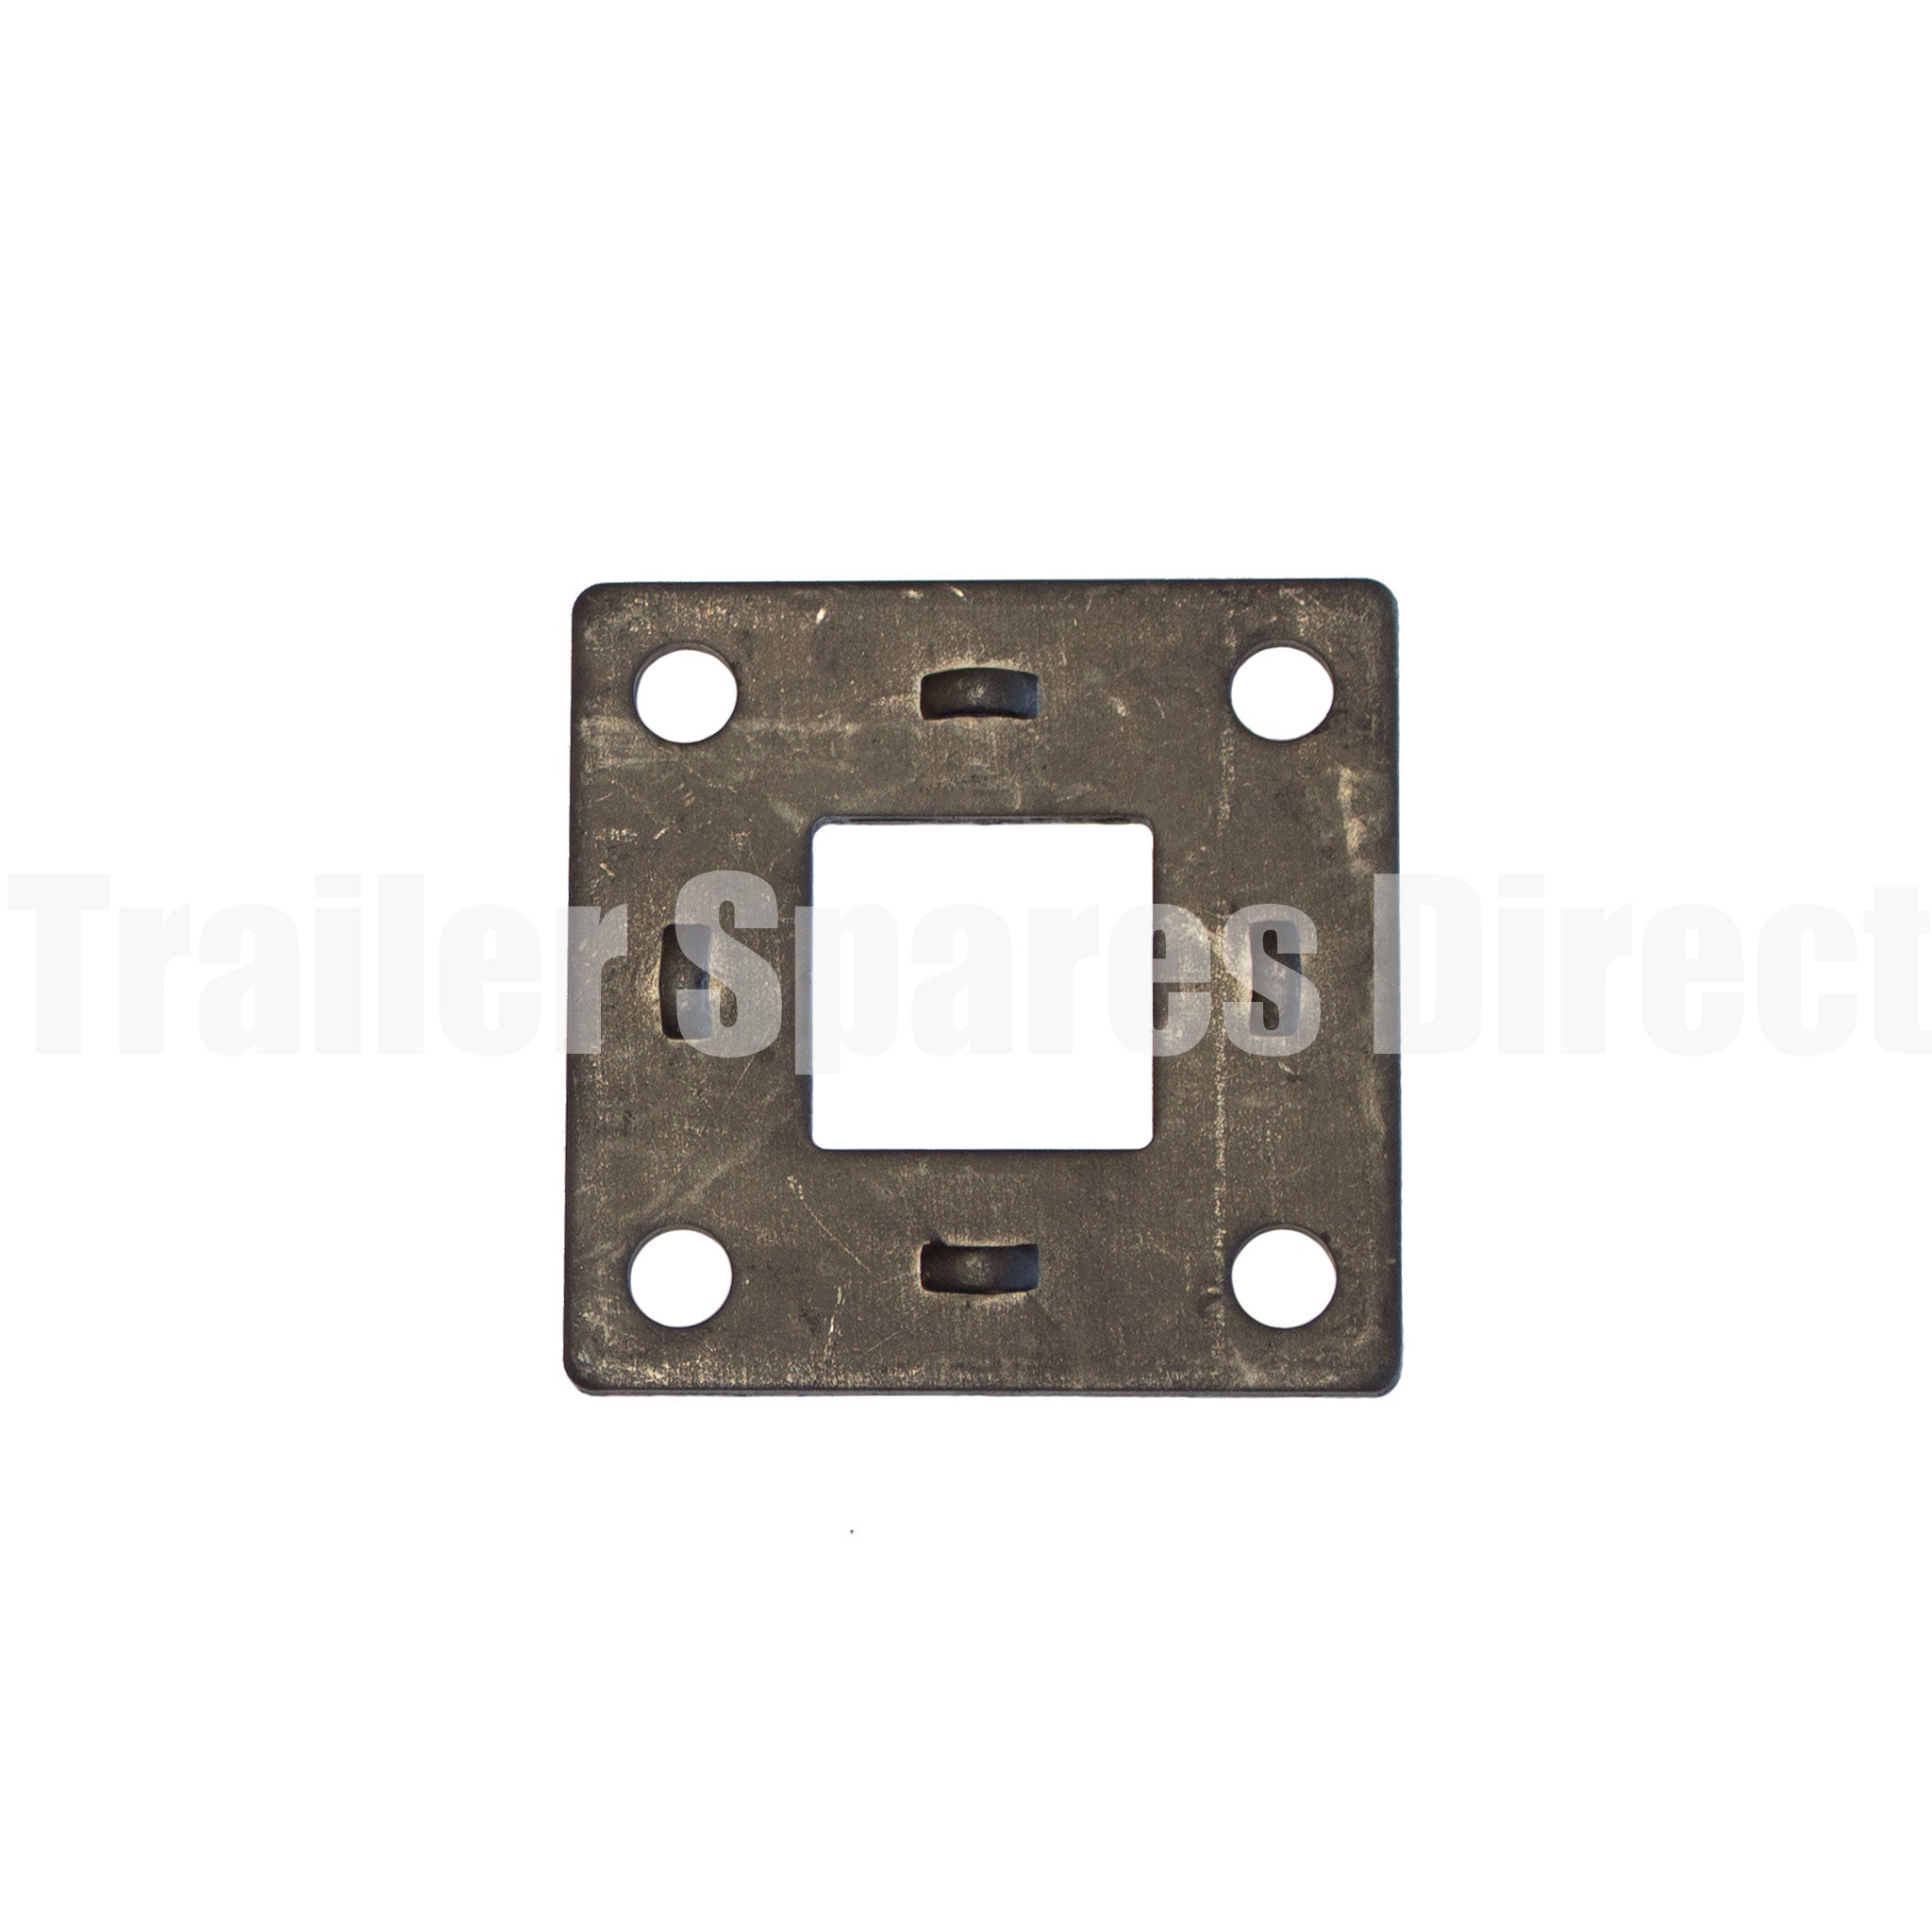 Weld-on mounting plate for 9 inch mechanical or 10 inch electric brakes - Pick axle sizes